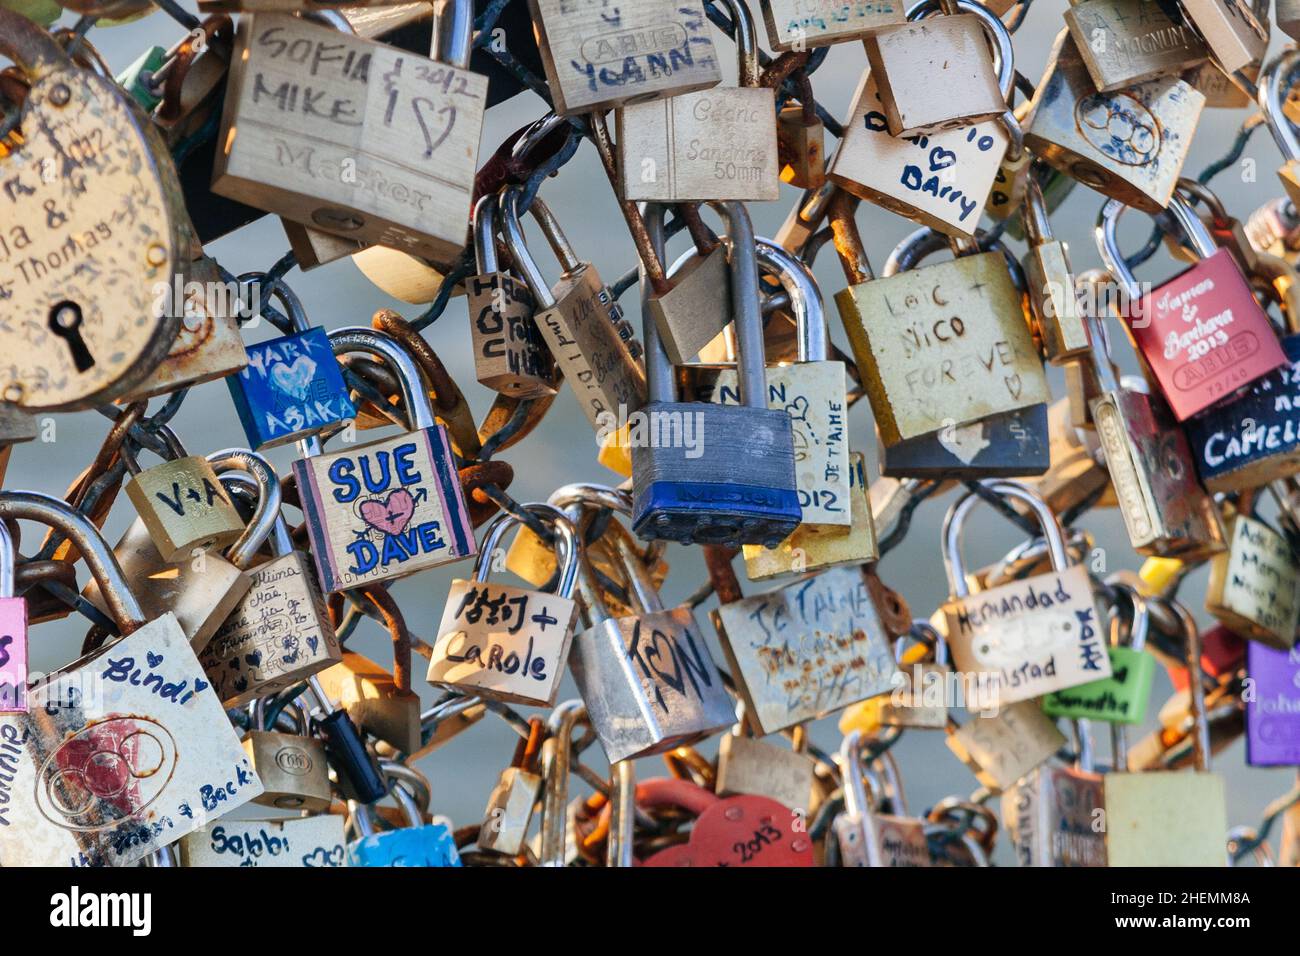 Padlocks with couples names on declaring everlasting love, locked onto the mesh fence of Post des Arts in Paris, France. Stock Photo